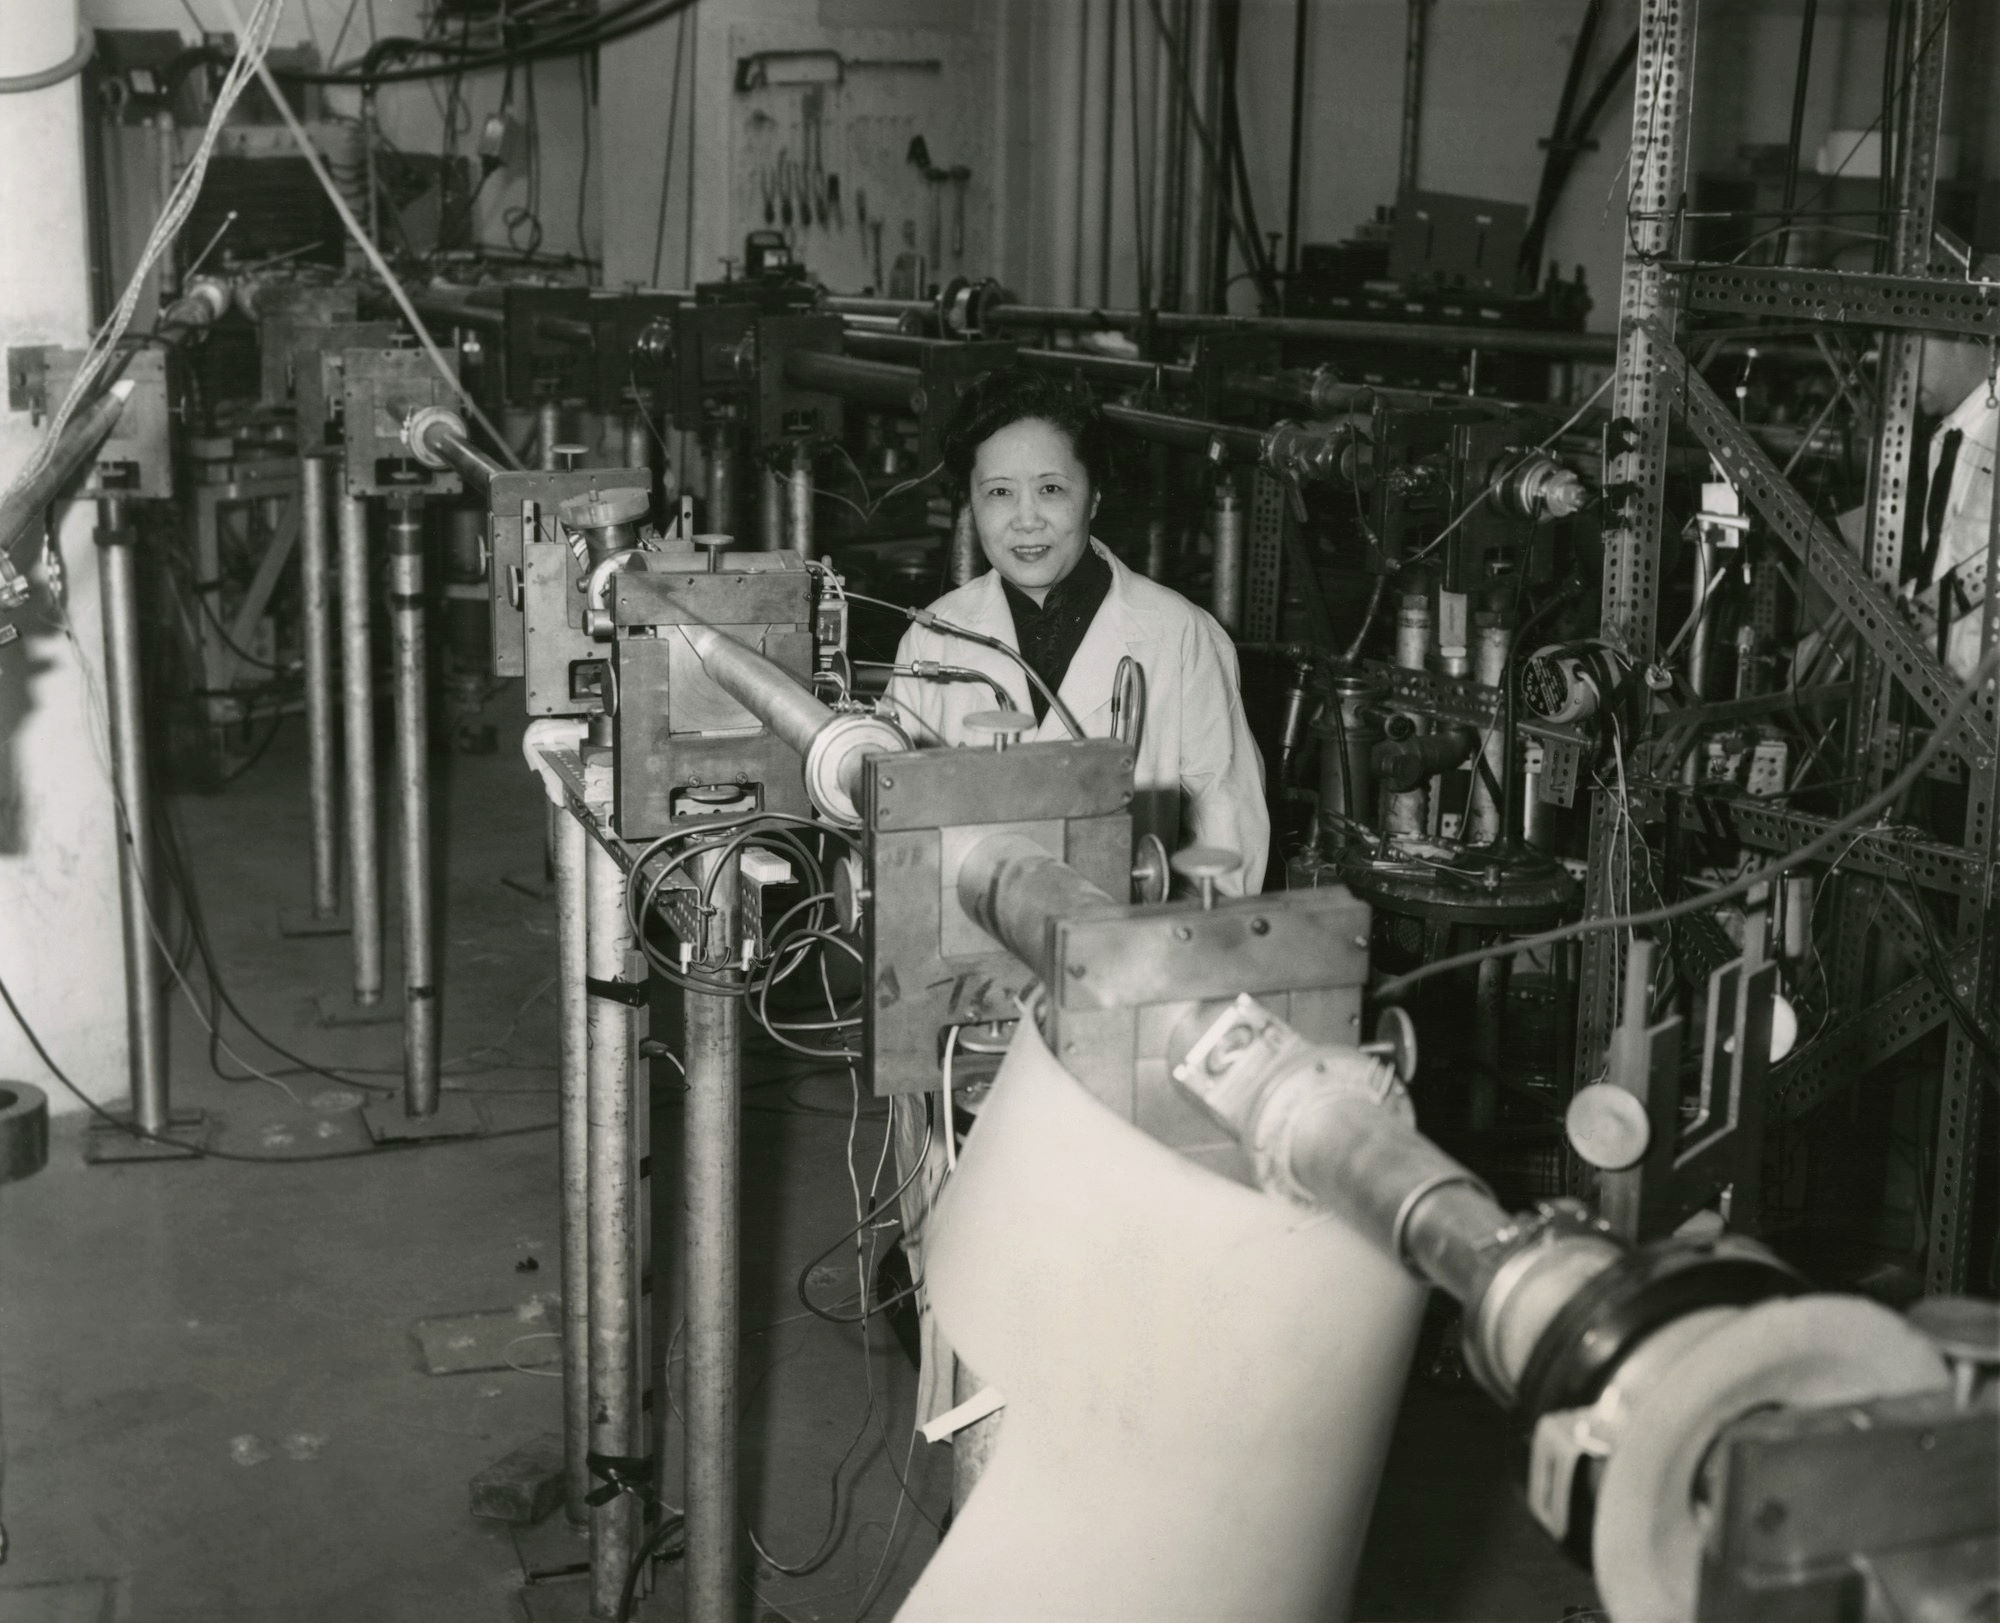 Dr. Wu at Columbia University in 1963 with experimental apparatus